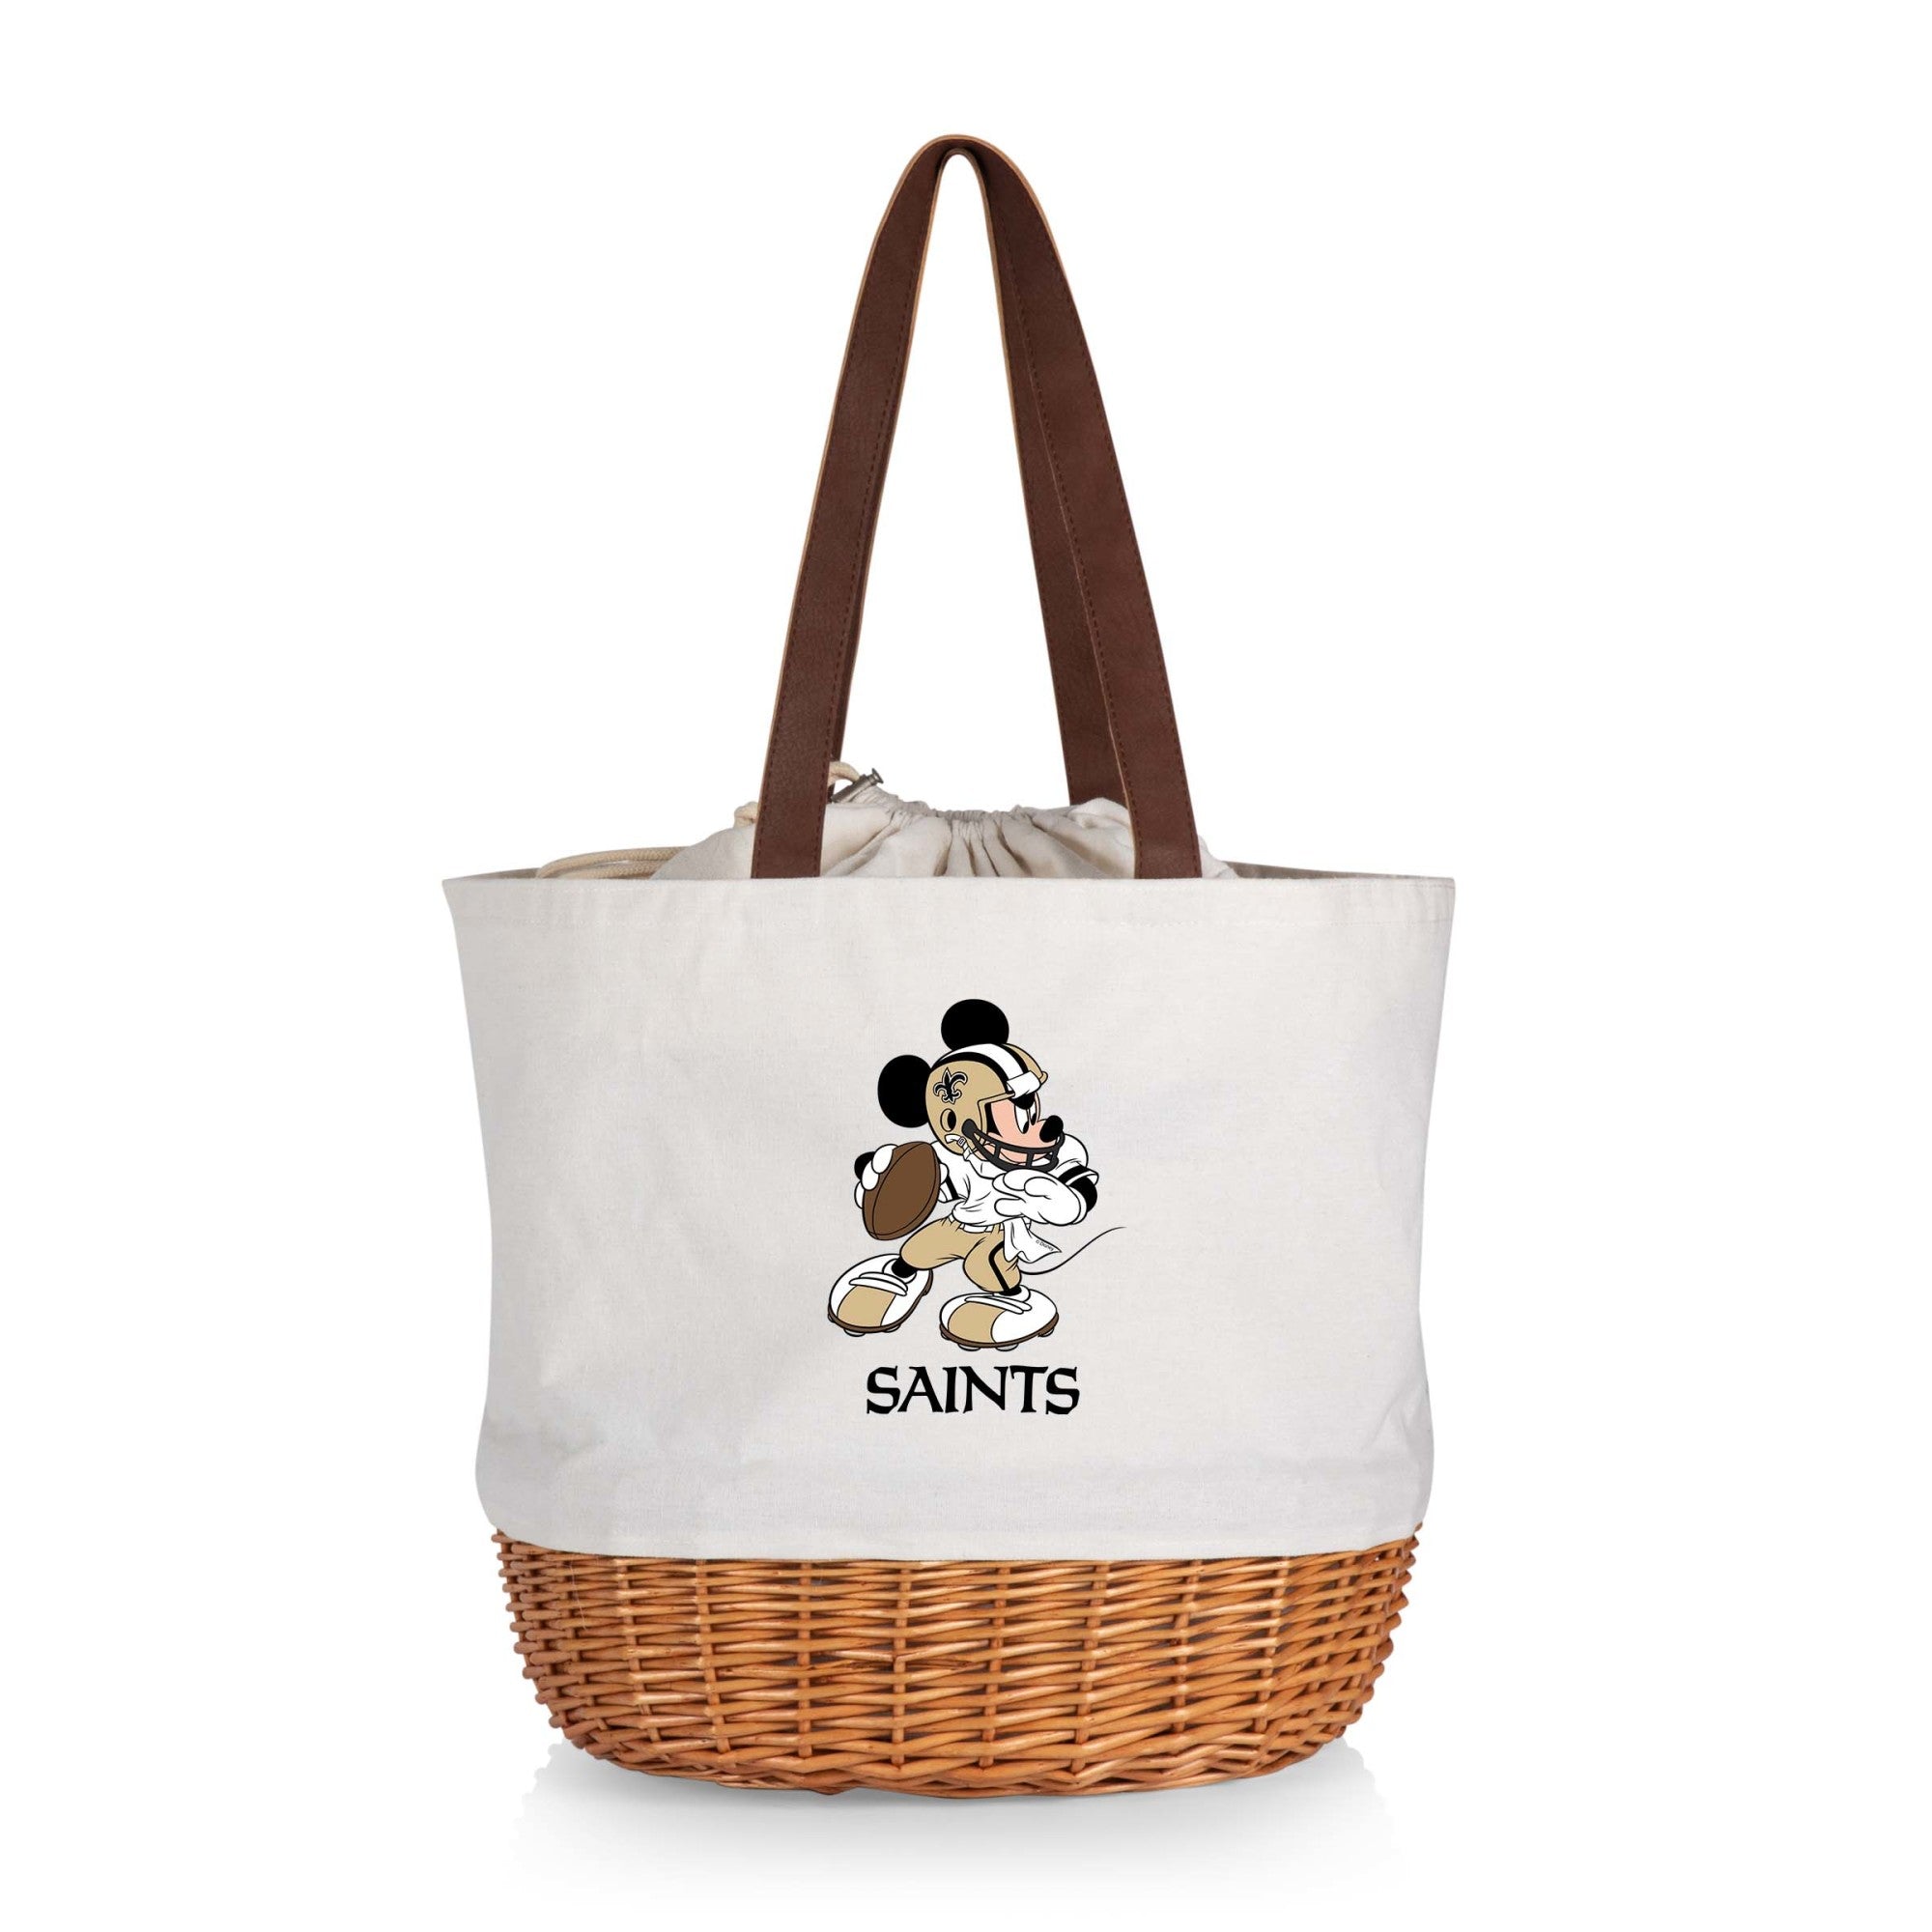 Mickey Mouse - New Orleans Saints - Coronado Canvas and Willow Basket Tote